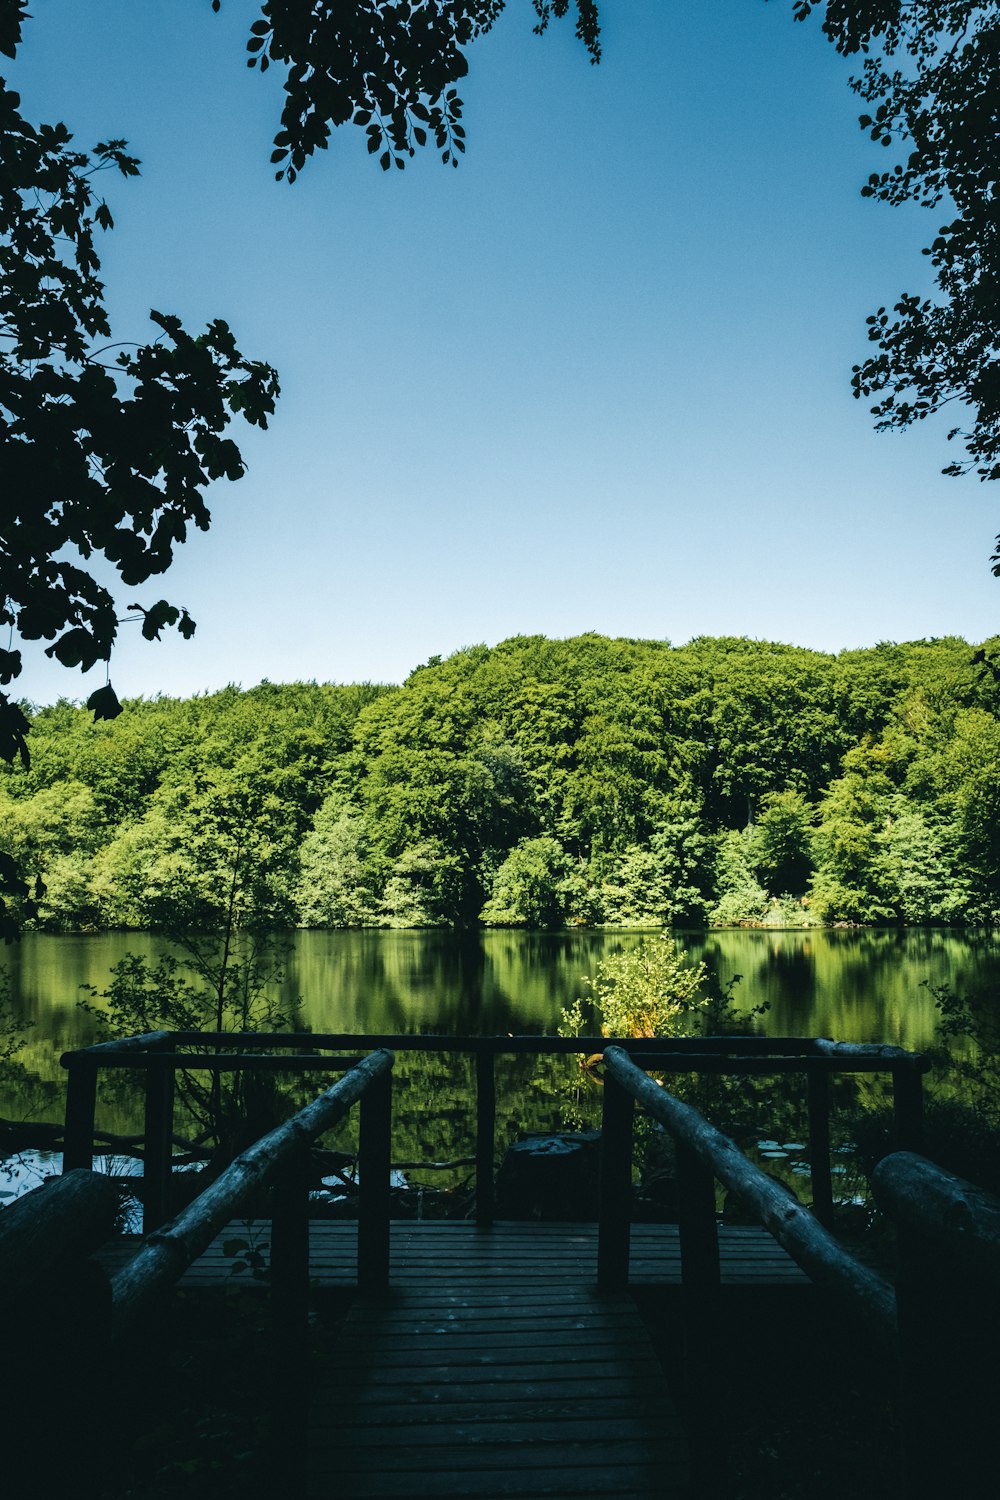 a wooden walkway leading to a lake surrounded by trees